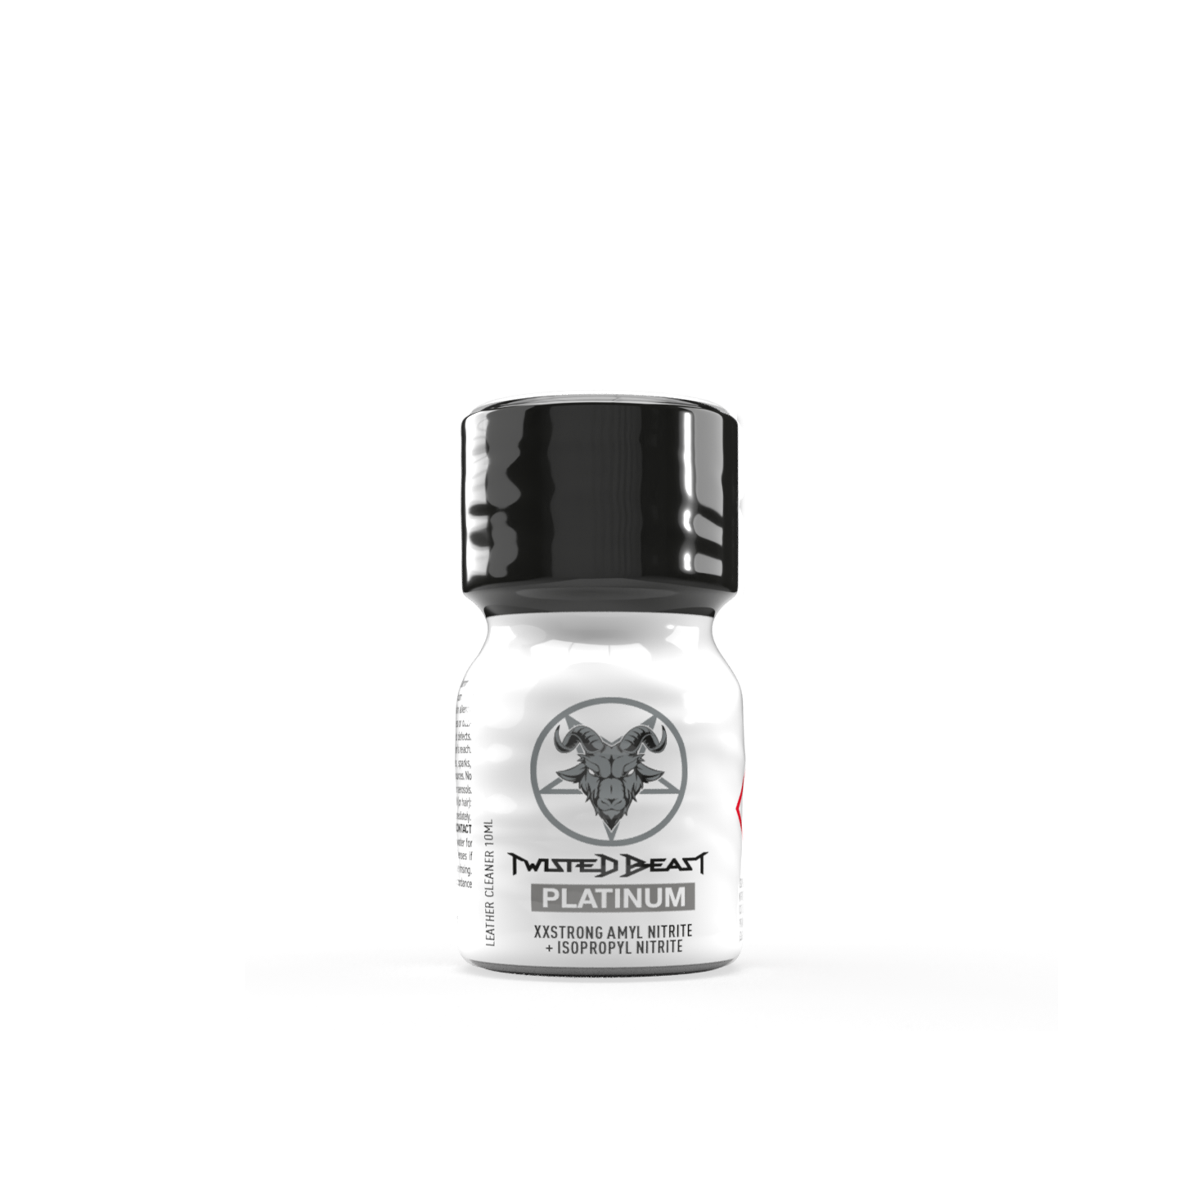 A photo of Twisted Beast Platinum Poppers in a smaller 10ml bottle.